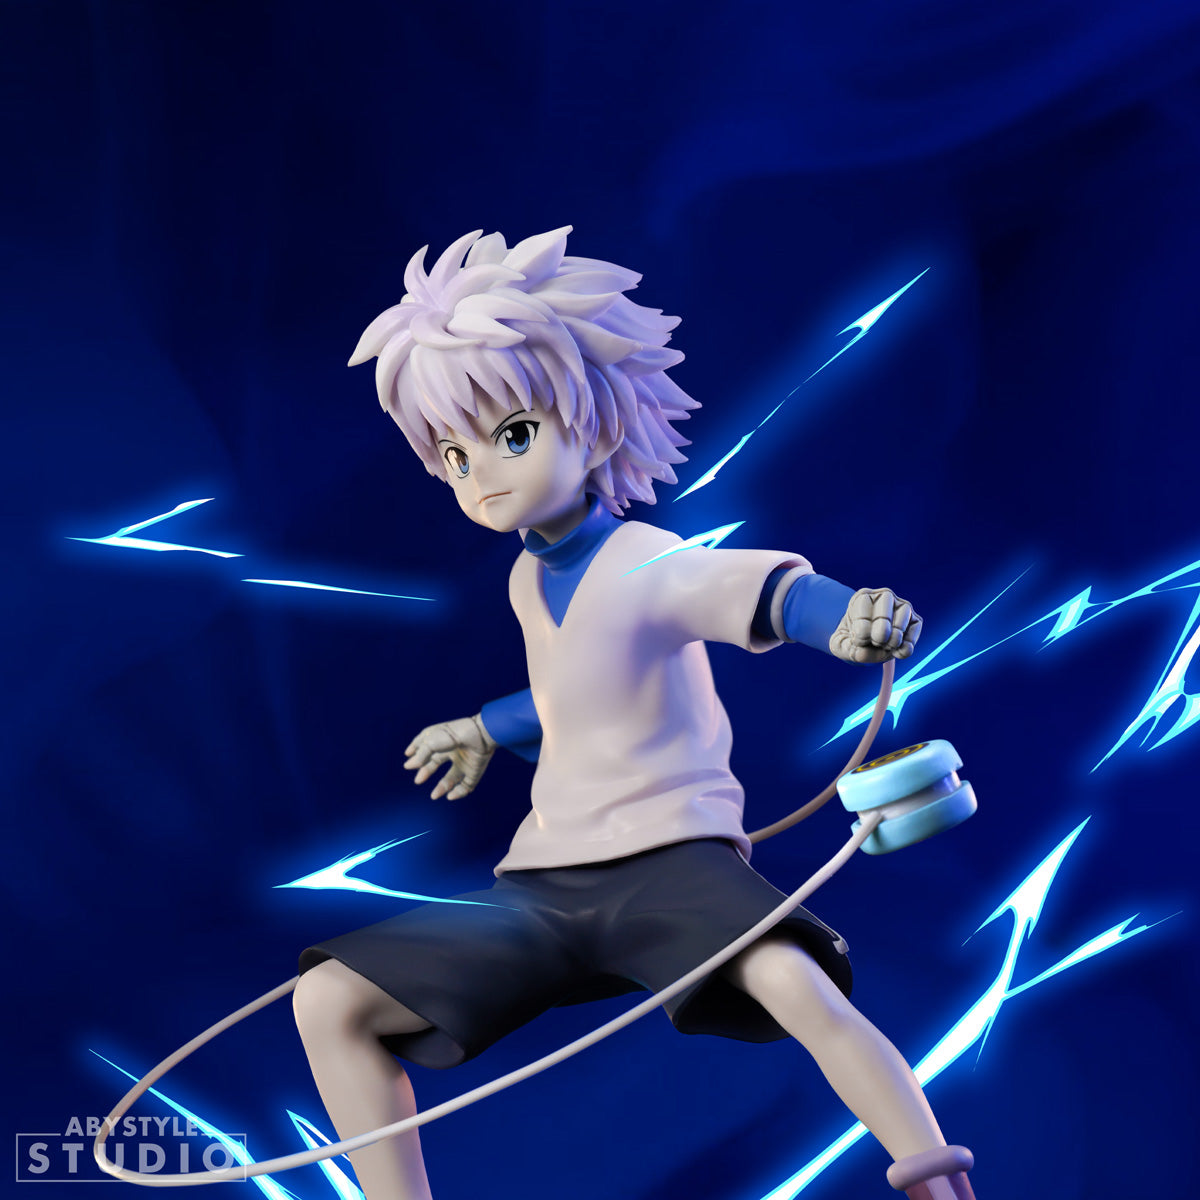 The Best Killua Zoldyck Quotes of All Time (With Images)